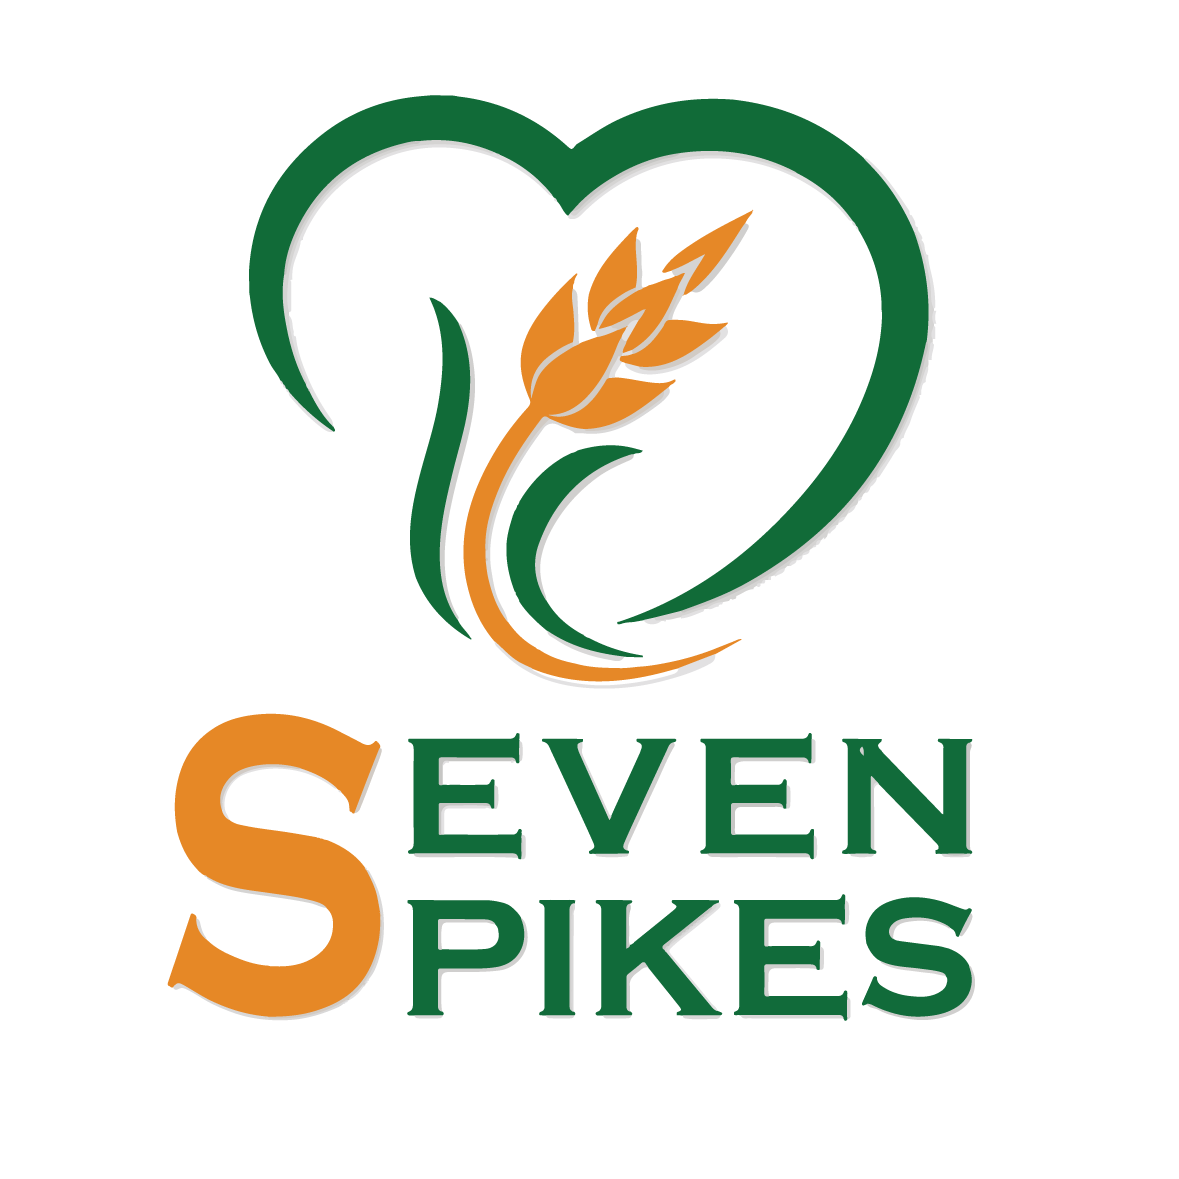 SEVEN SPIKES